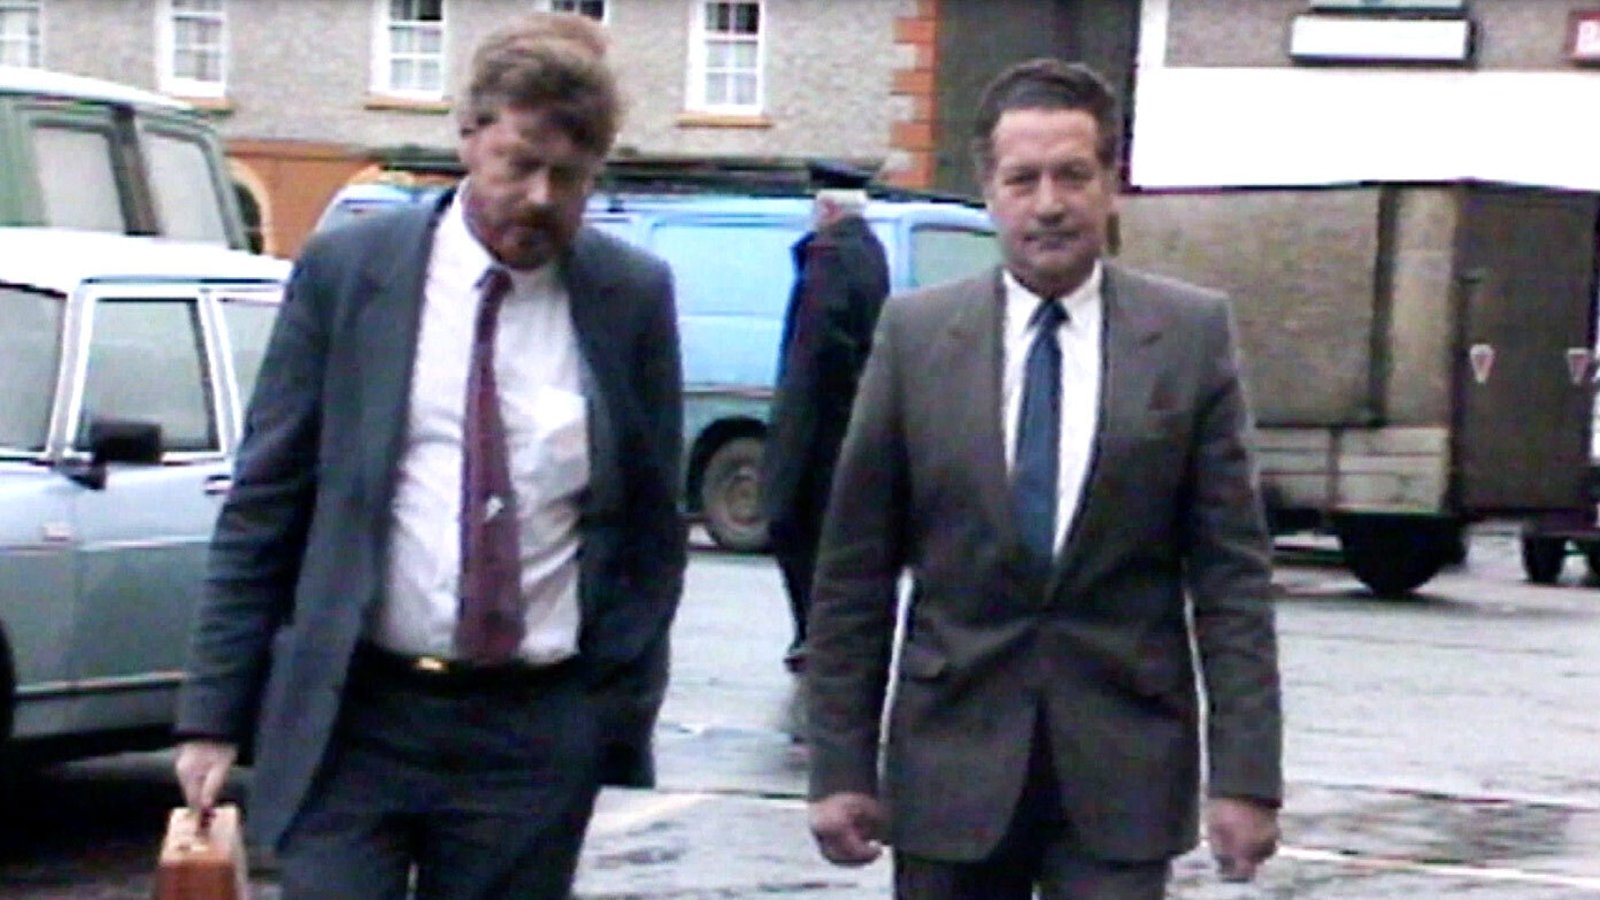 Image - In newly uncovered evidence, Richard Flynn (right) admitted he struck Fr Molloy more than two or three times